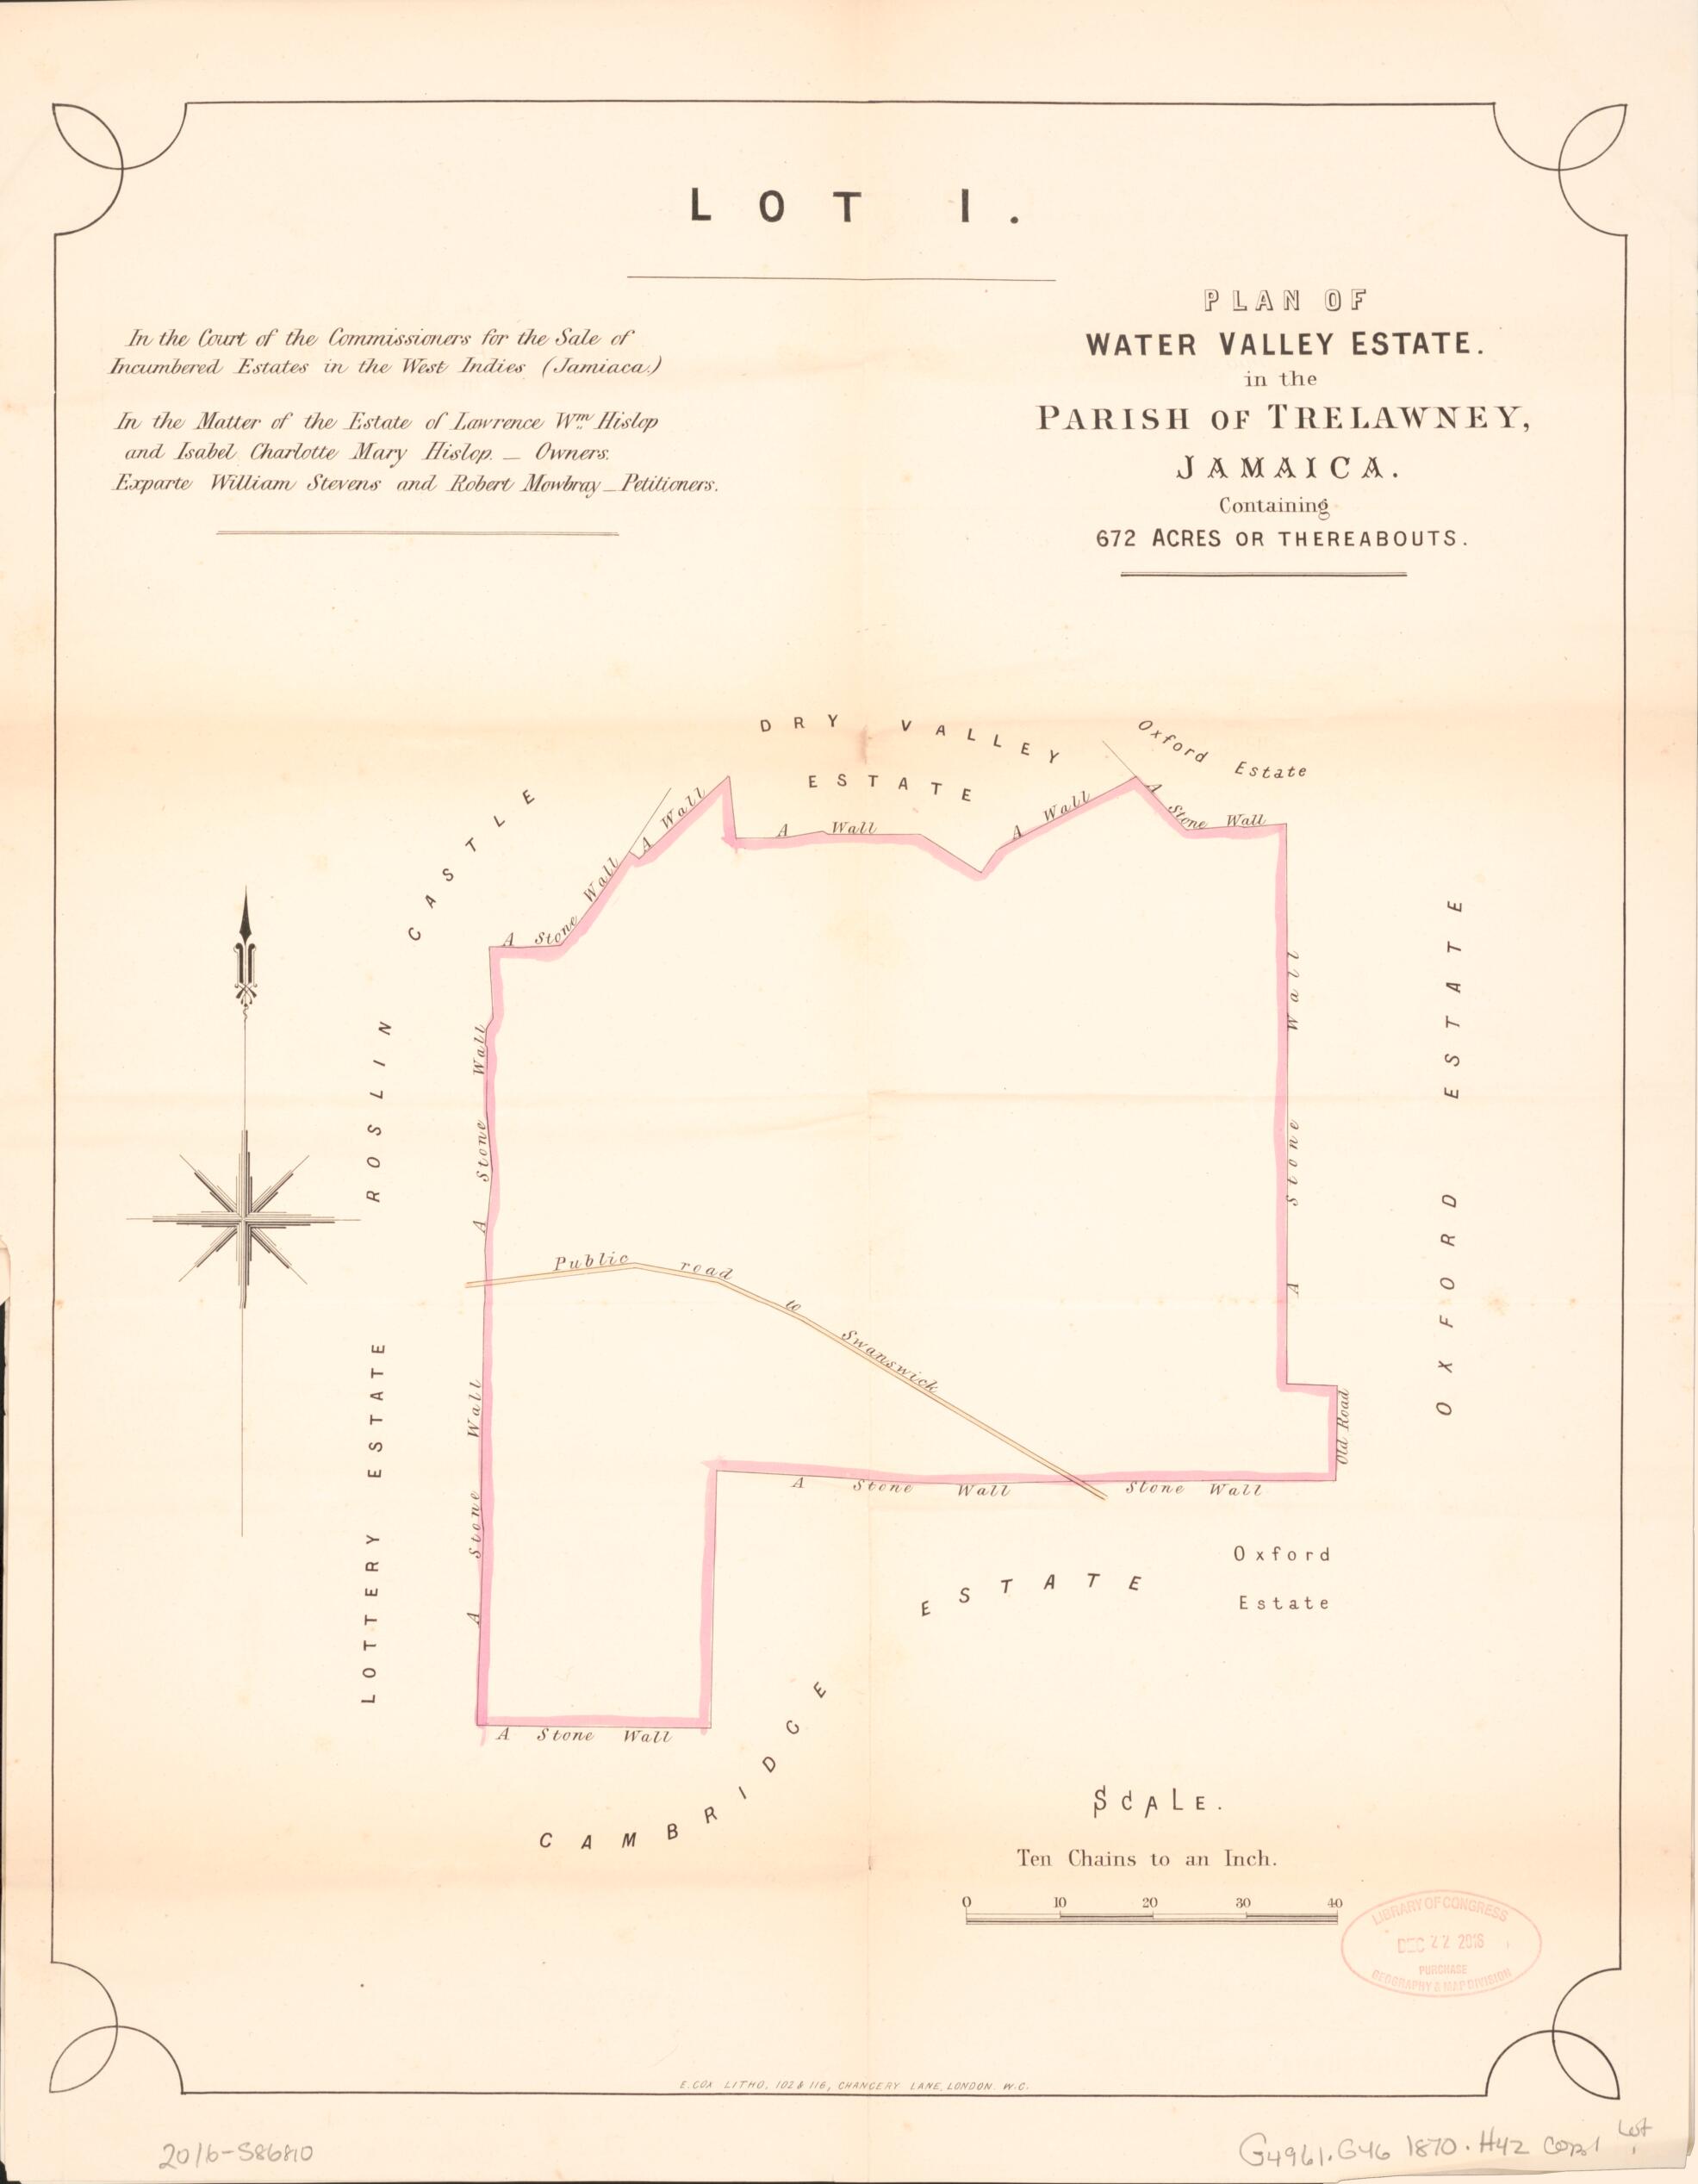 This old map of Lot 1. Plan of Water Valley Estate from Encumbered Estates In the West Indies (Jamaica) from 1870 was created by Vaughan &amp; Leifchild (Firm) Hards in 1870